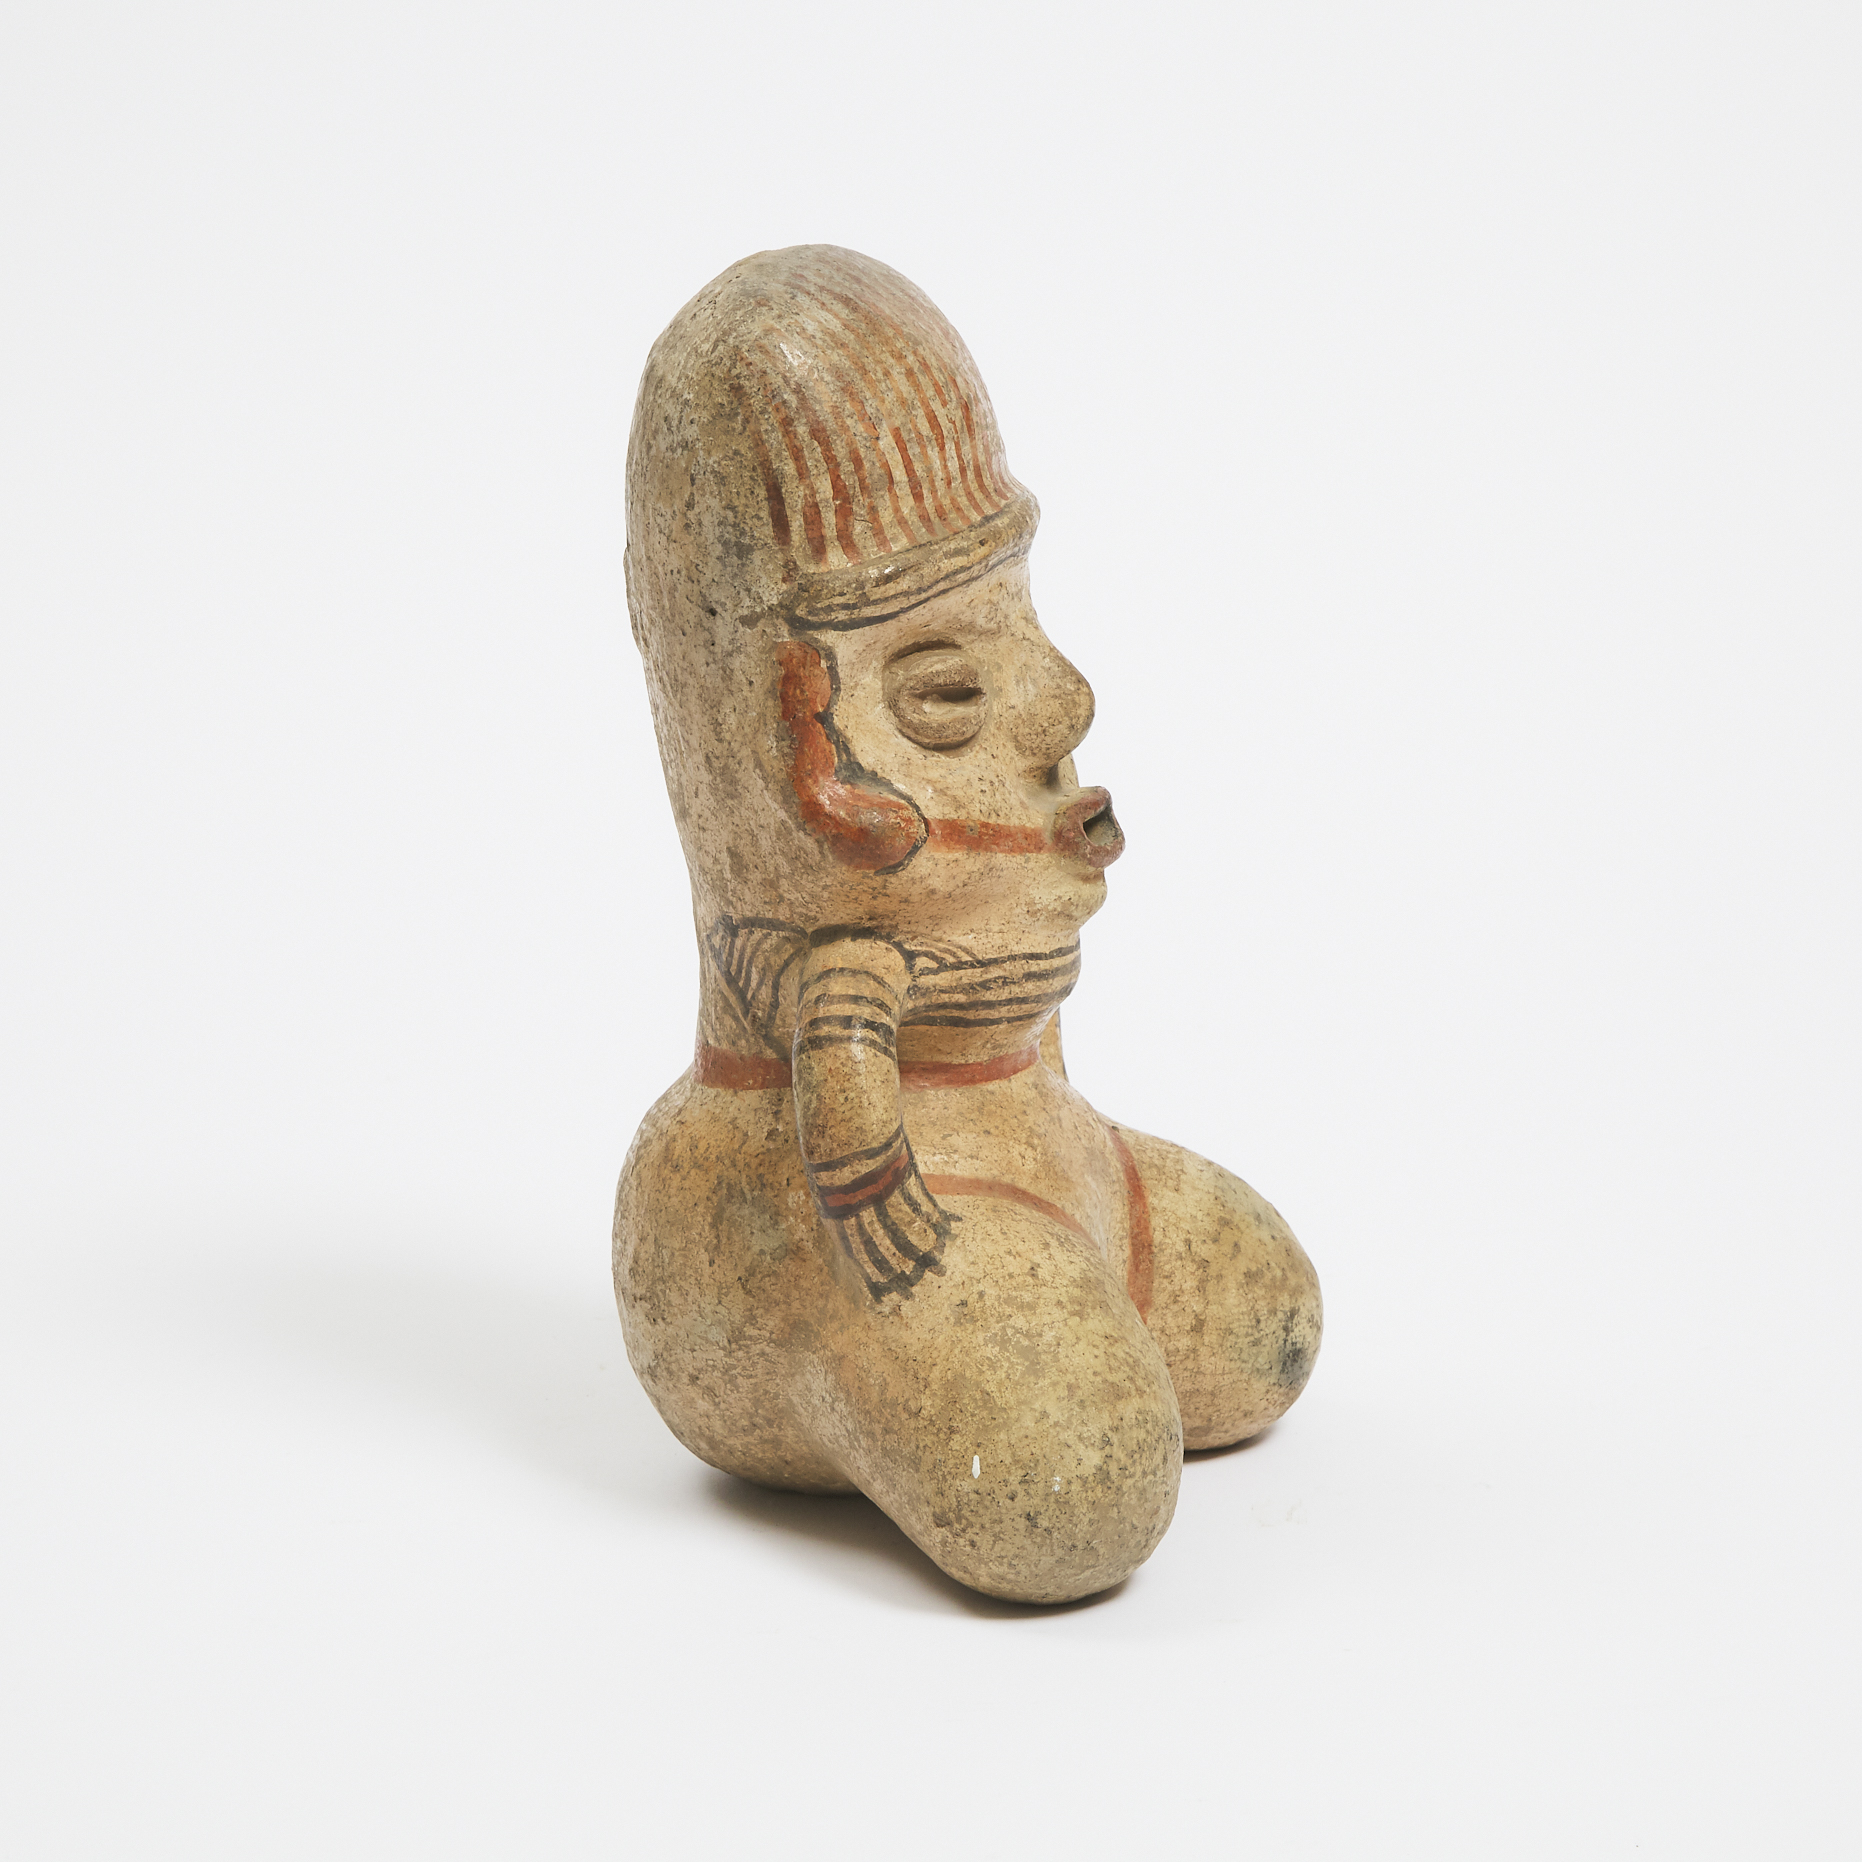 Pre-Columbian Polychrome Painted Pottery Kneeling Figure, possibly Nicoya, Costa Rica, 800-1200 AD